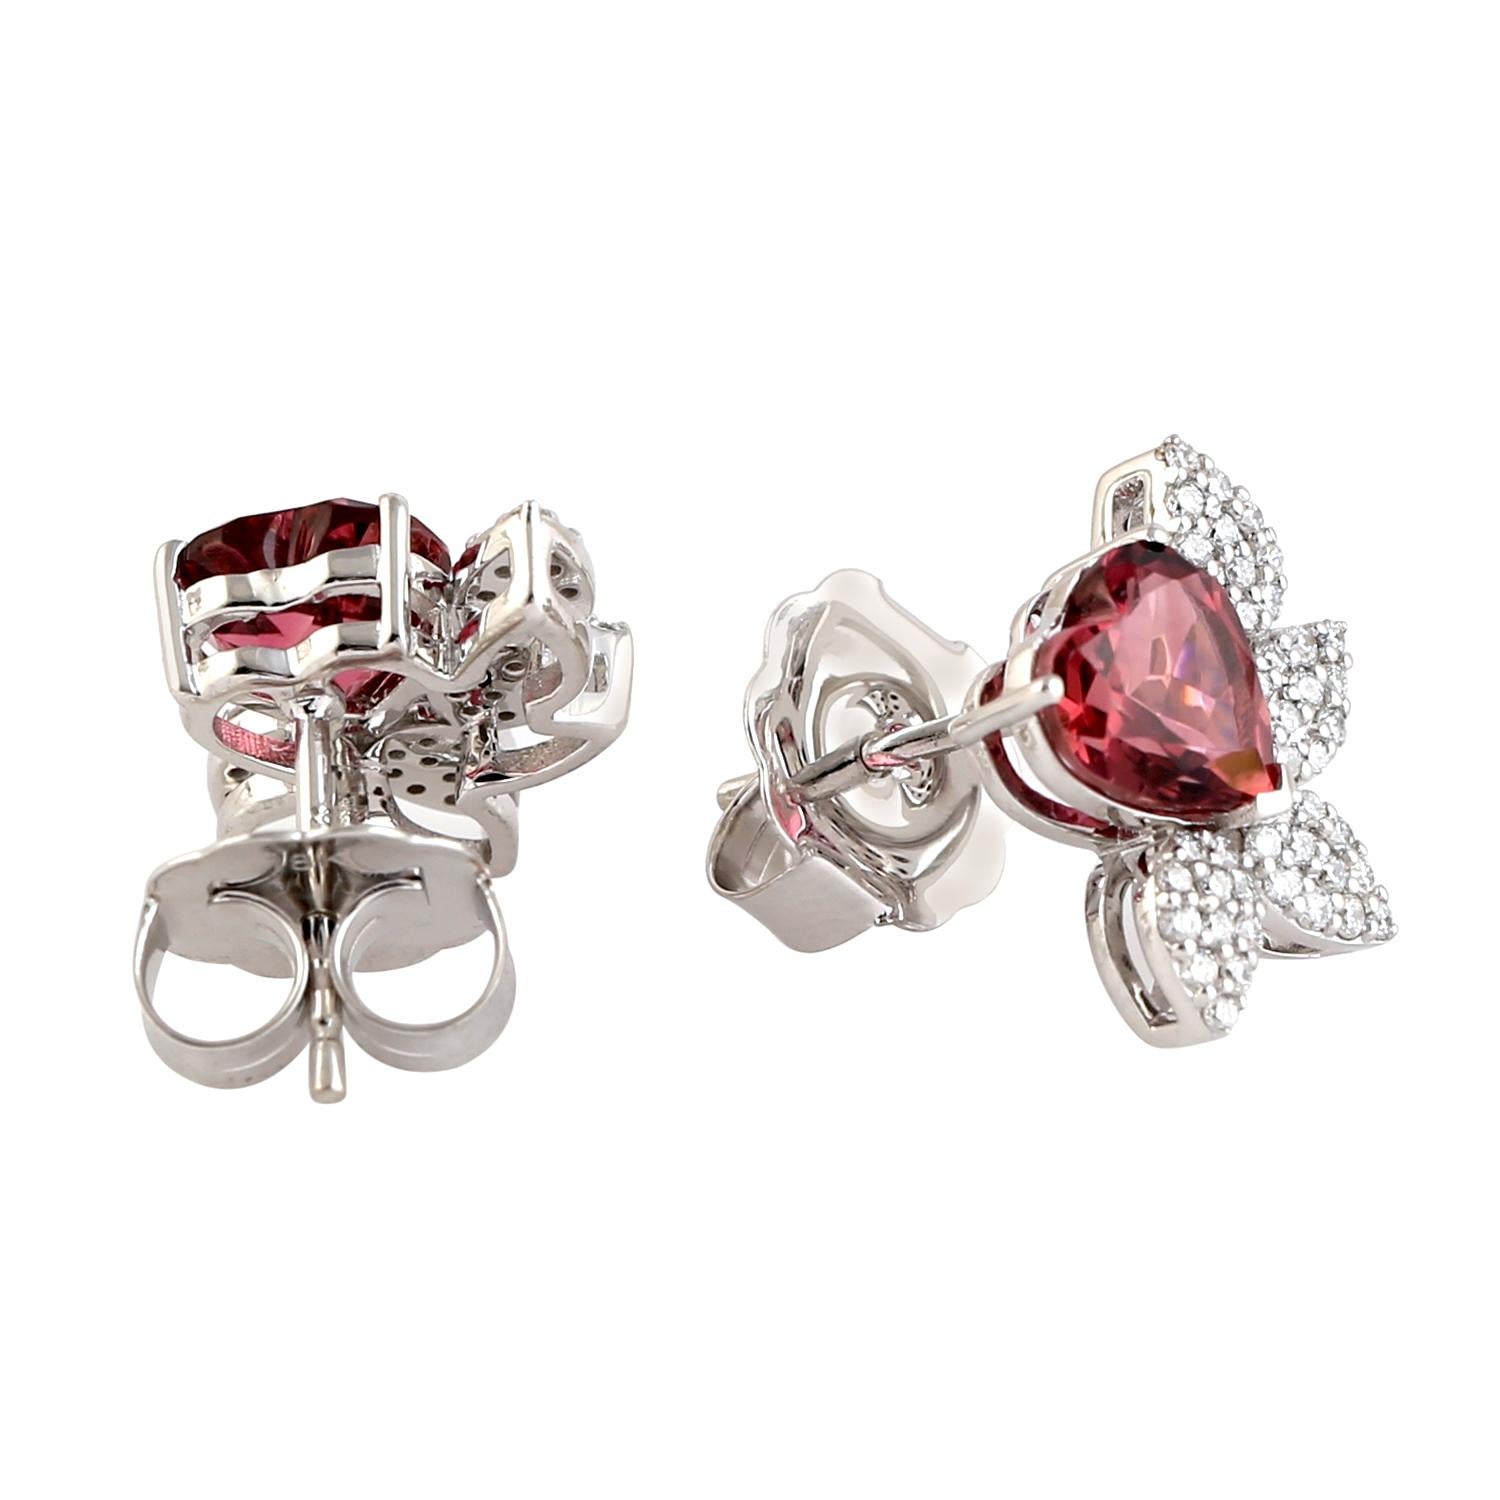 Art Deco Heart Shaped Studs WIth Diamonds Made In 18k White Gold For Sale